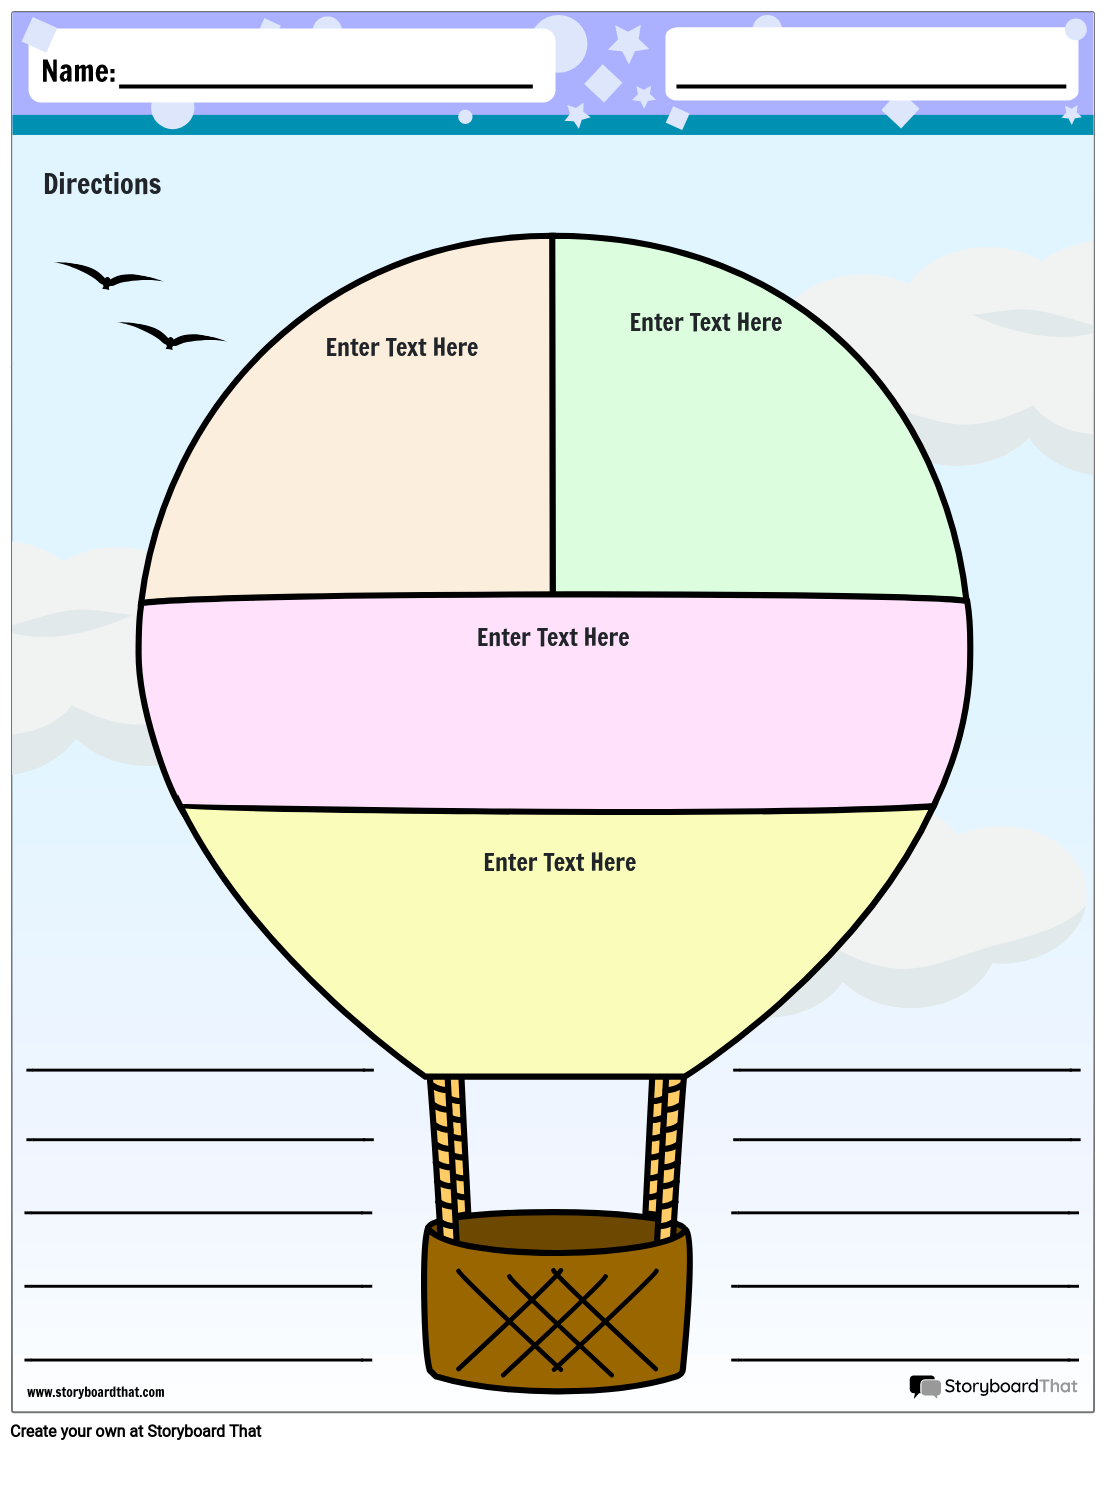 Graphic Organizer Layout with Colored Hot Air Balloon